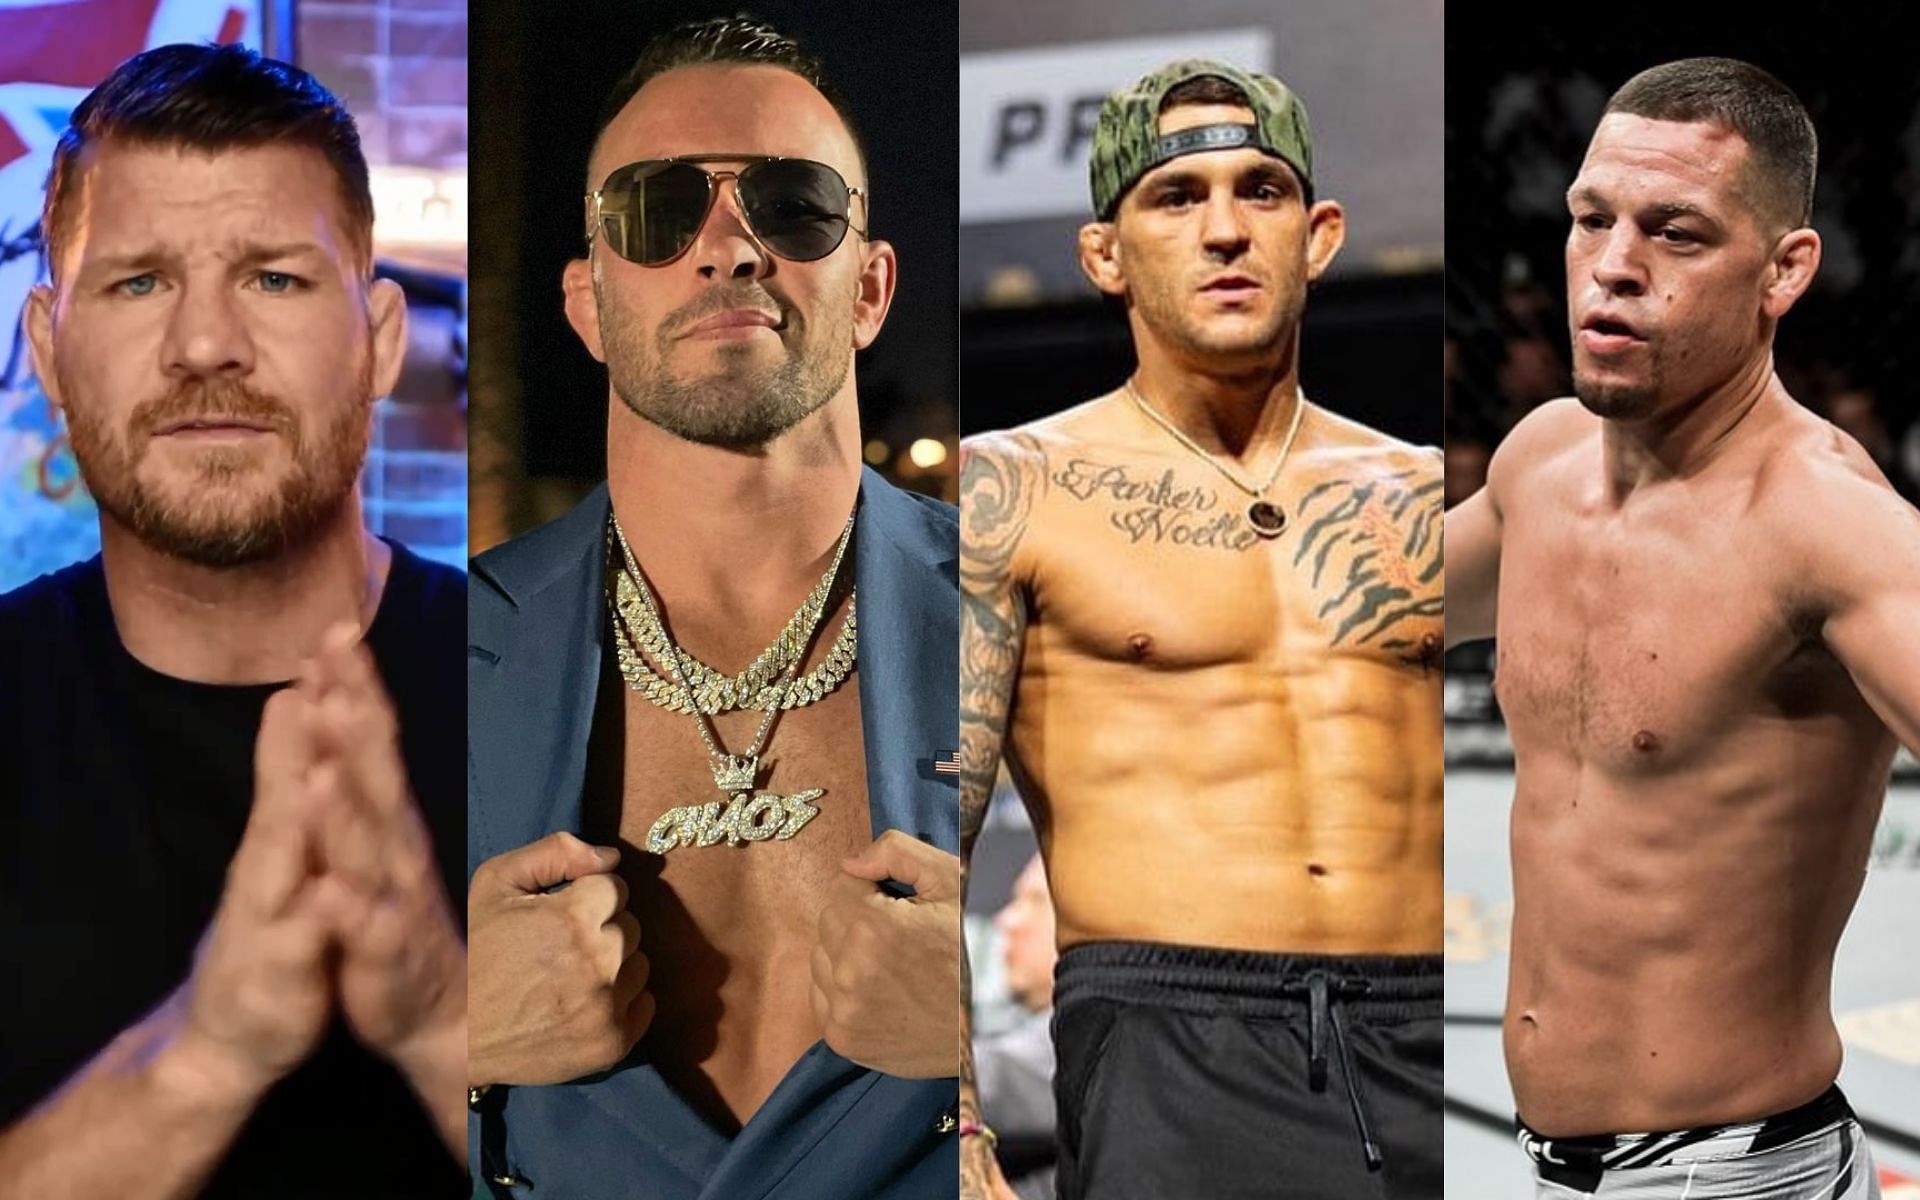 [L-R] Michael Bisping, Colby Covington, Dustin Poirier, Nate Diaz [Images courtesy: Michael Bisping via YouTube, @colbycovmma, @dustinpoirier, and @natediaz209 via Instagram]